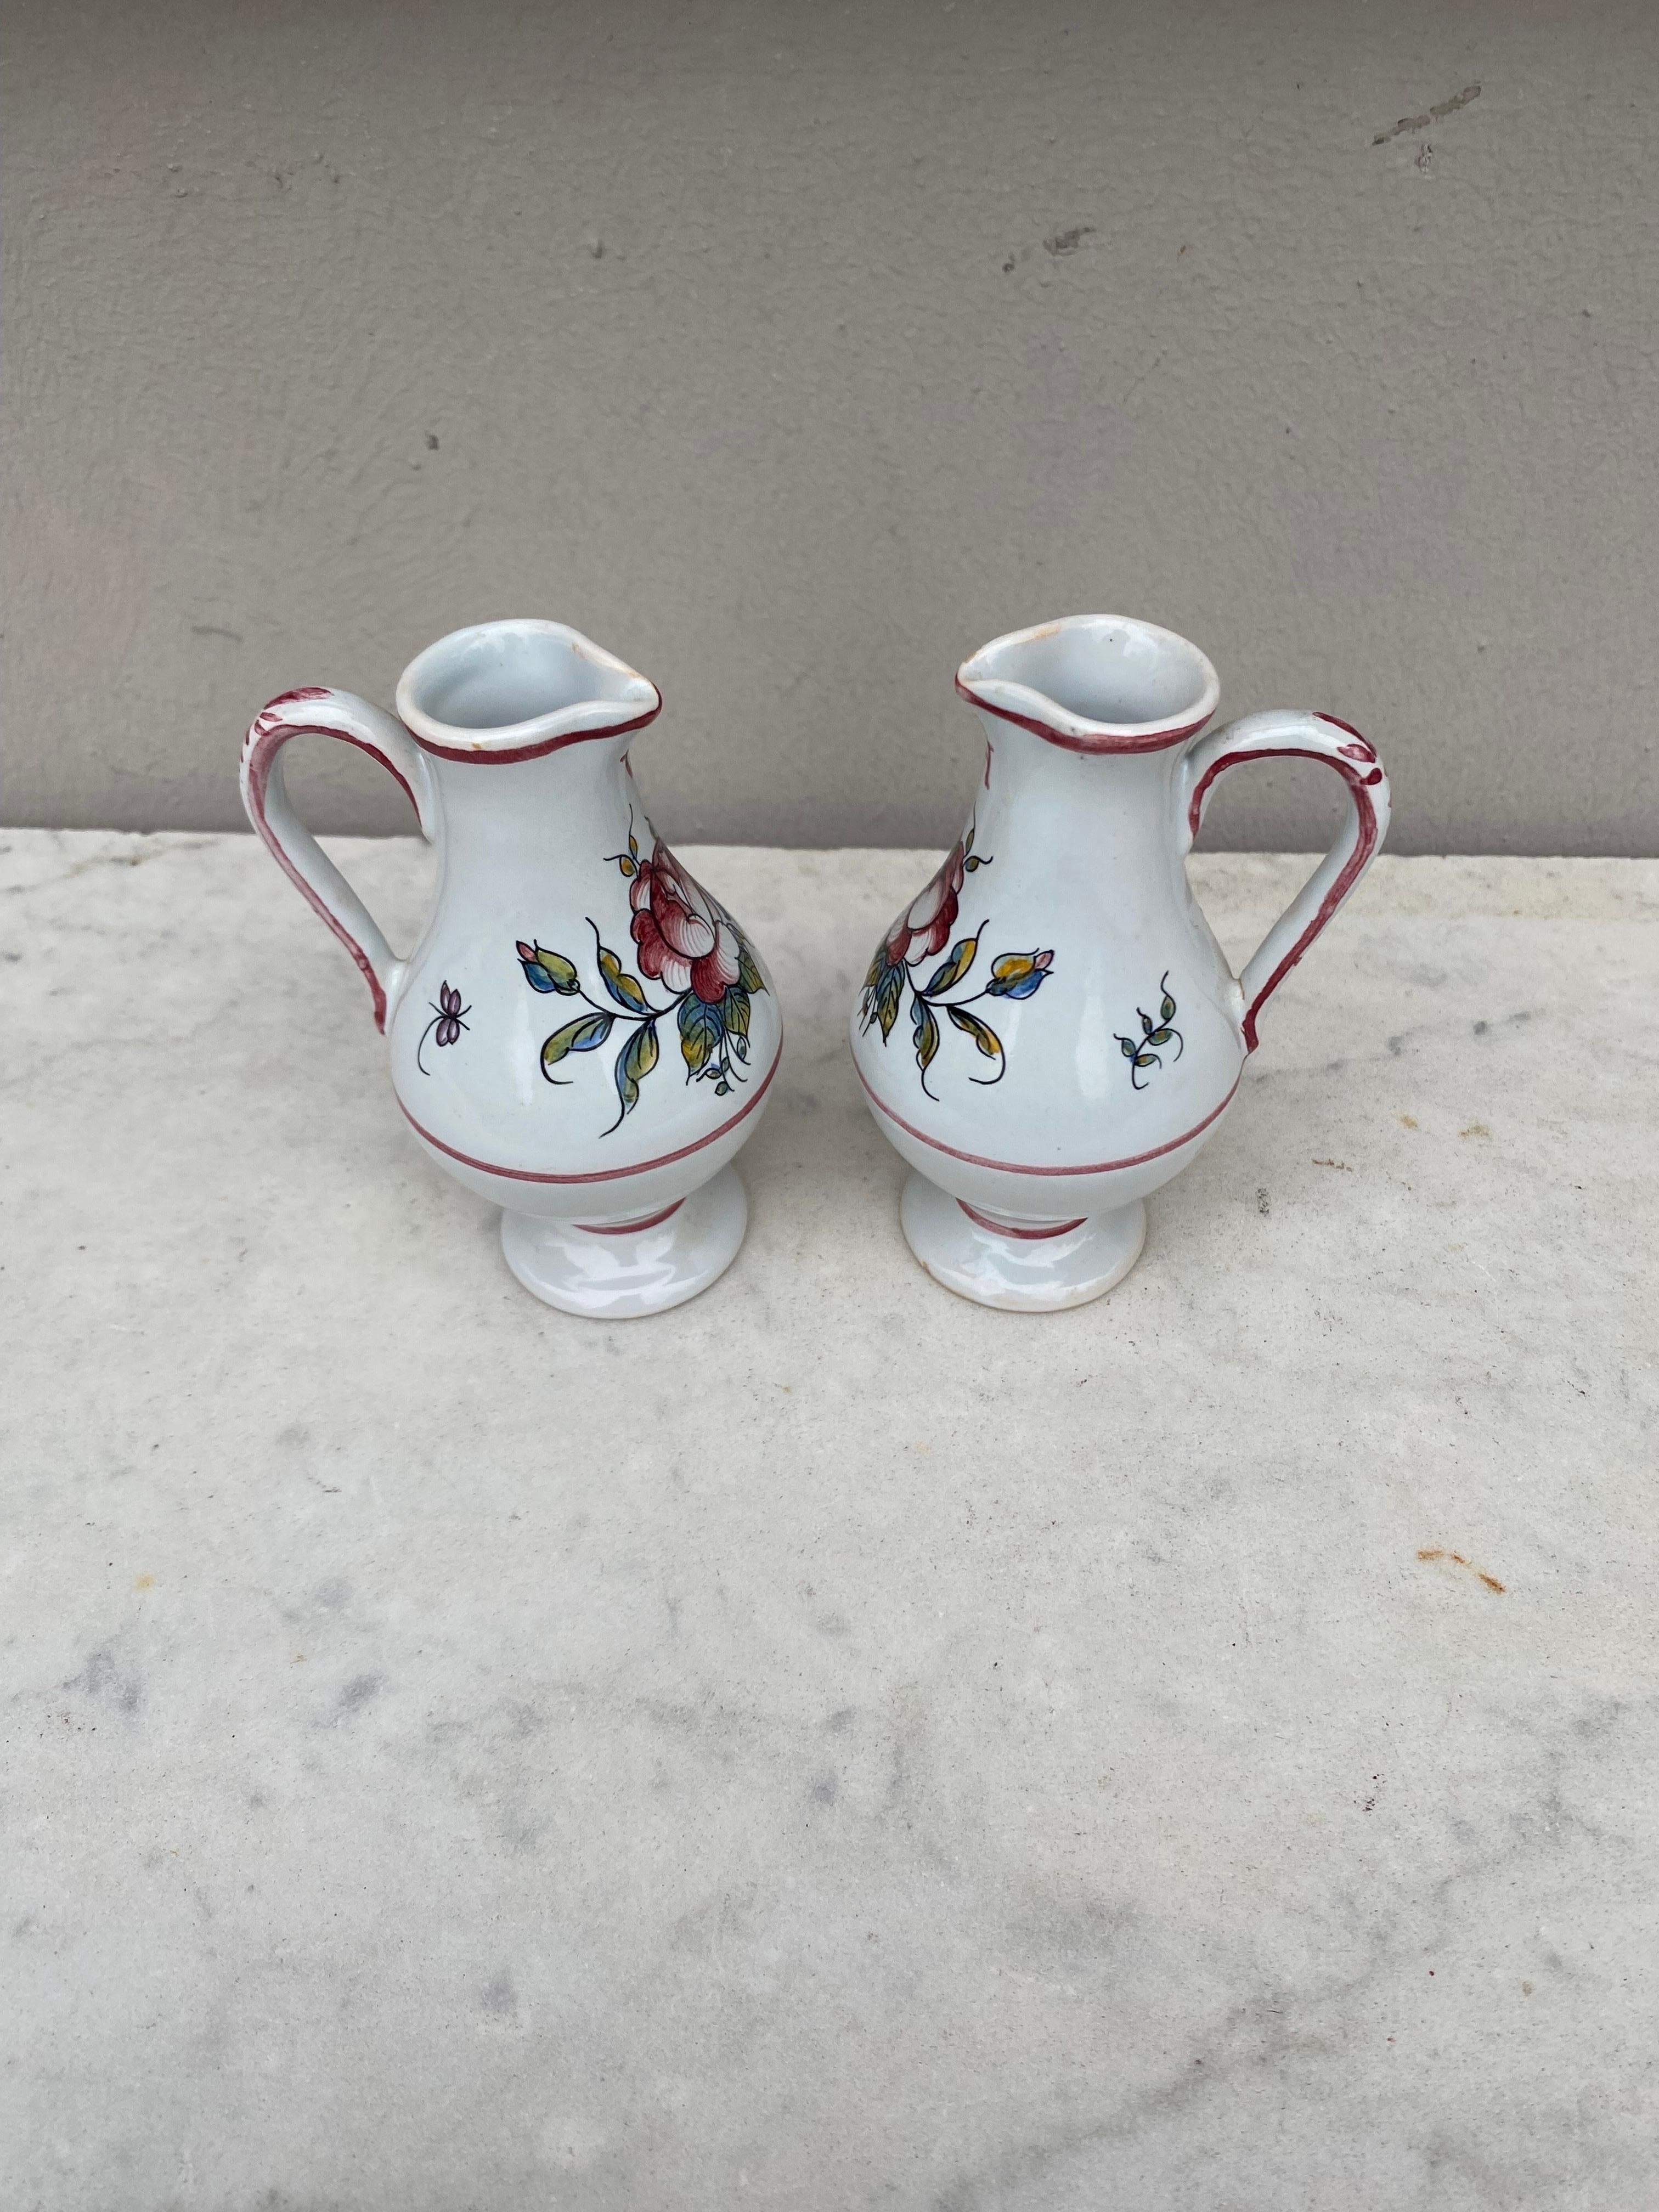 Pair of antique French faience oil and vinegar pitchers, circa 1900. Unsigned. Minors chips.
Decorated with roses.